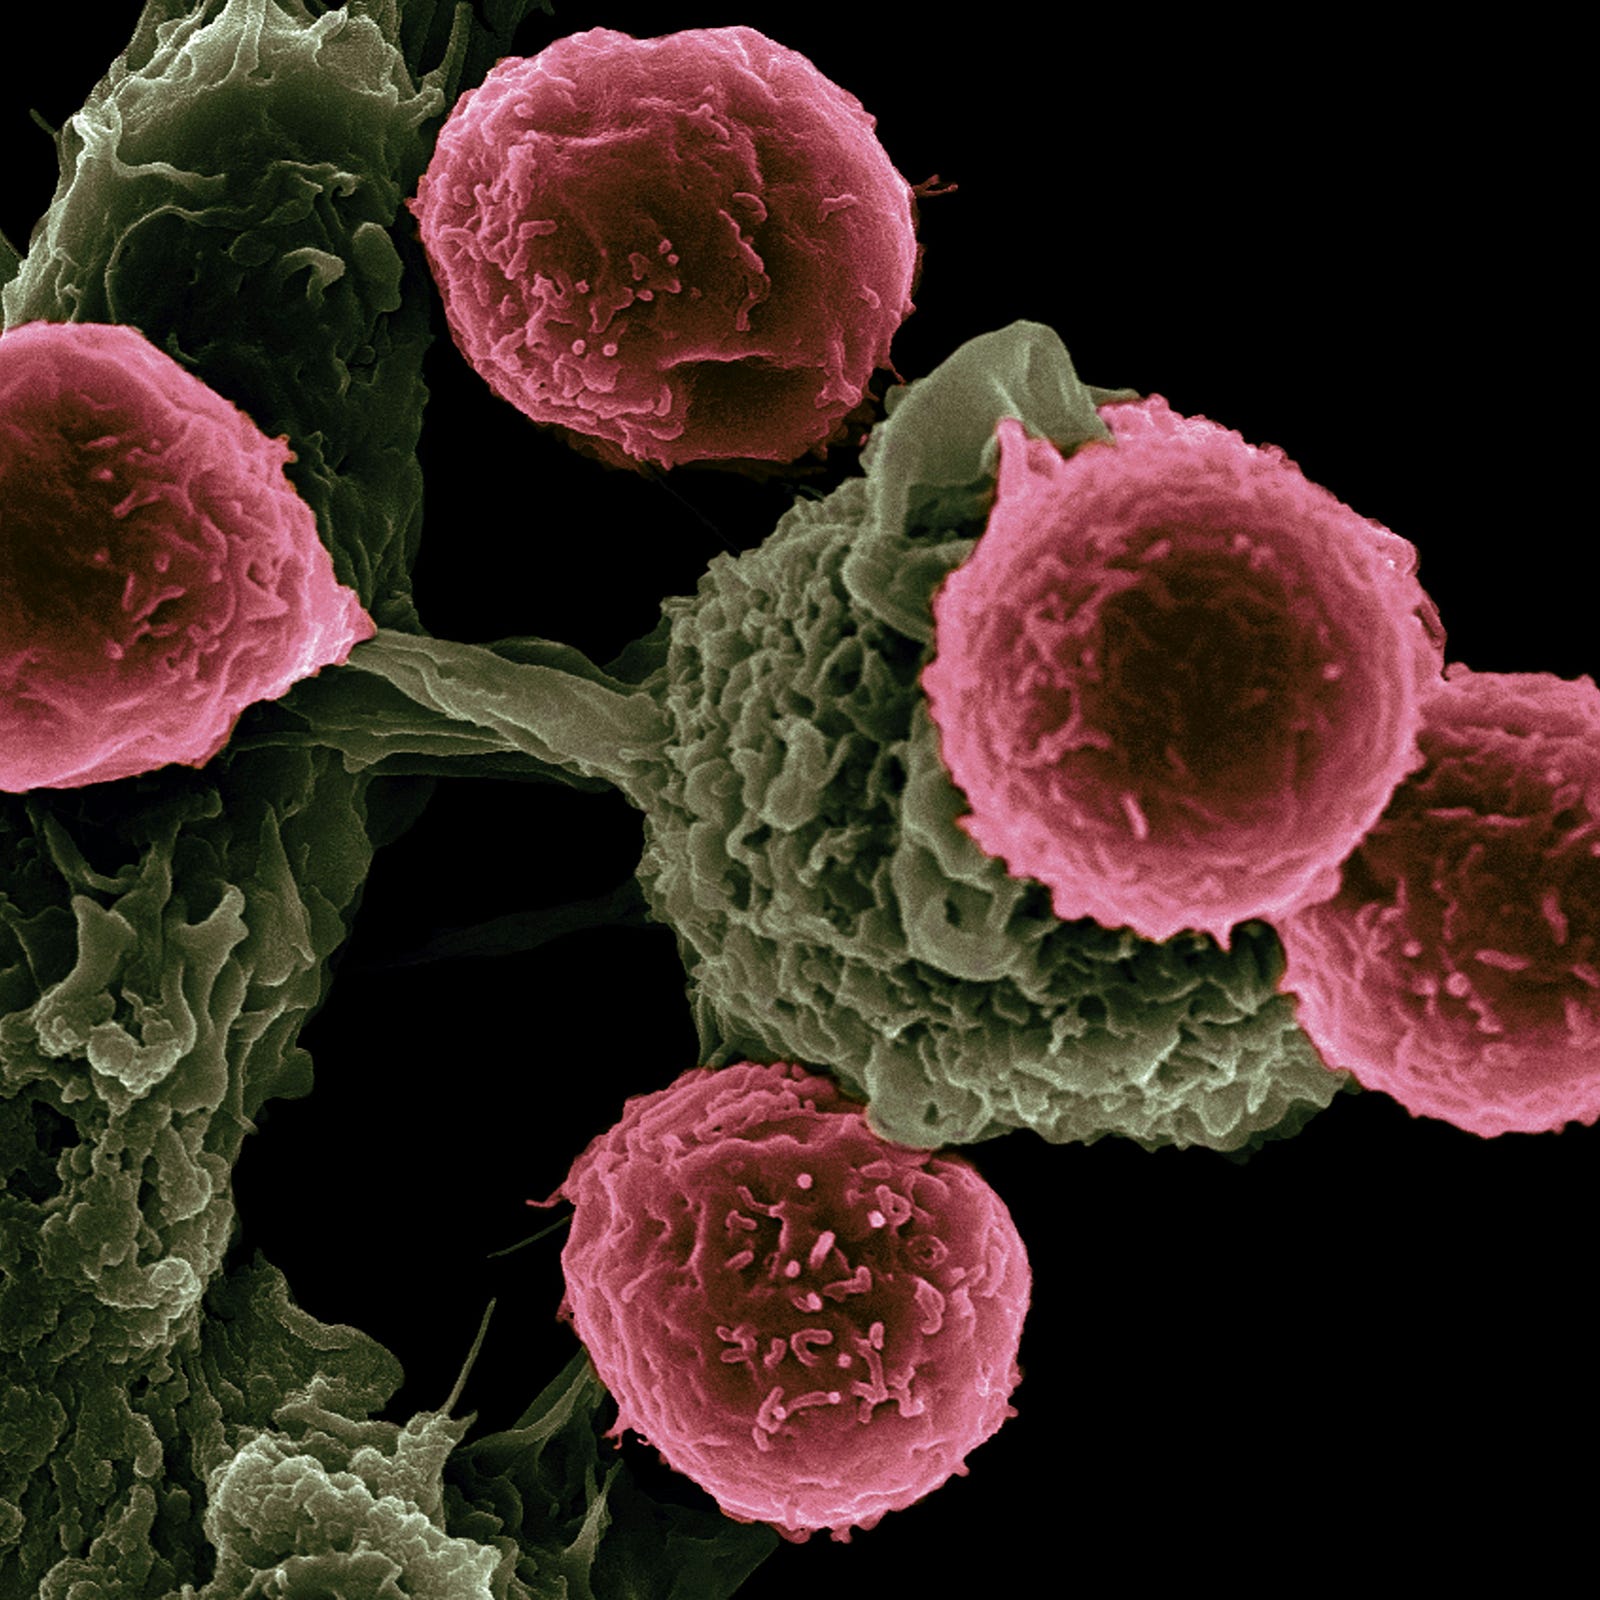 Photomicrograph of cancer cells.